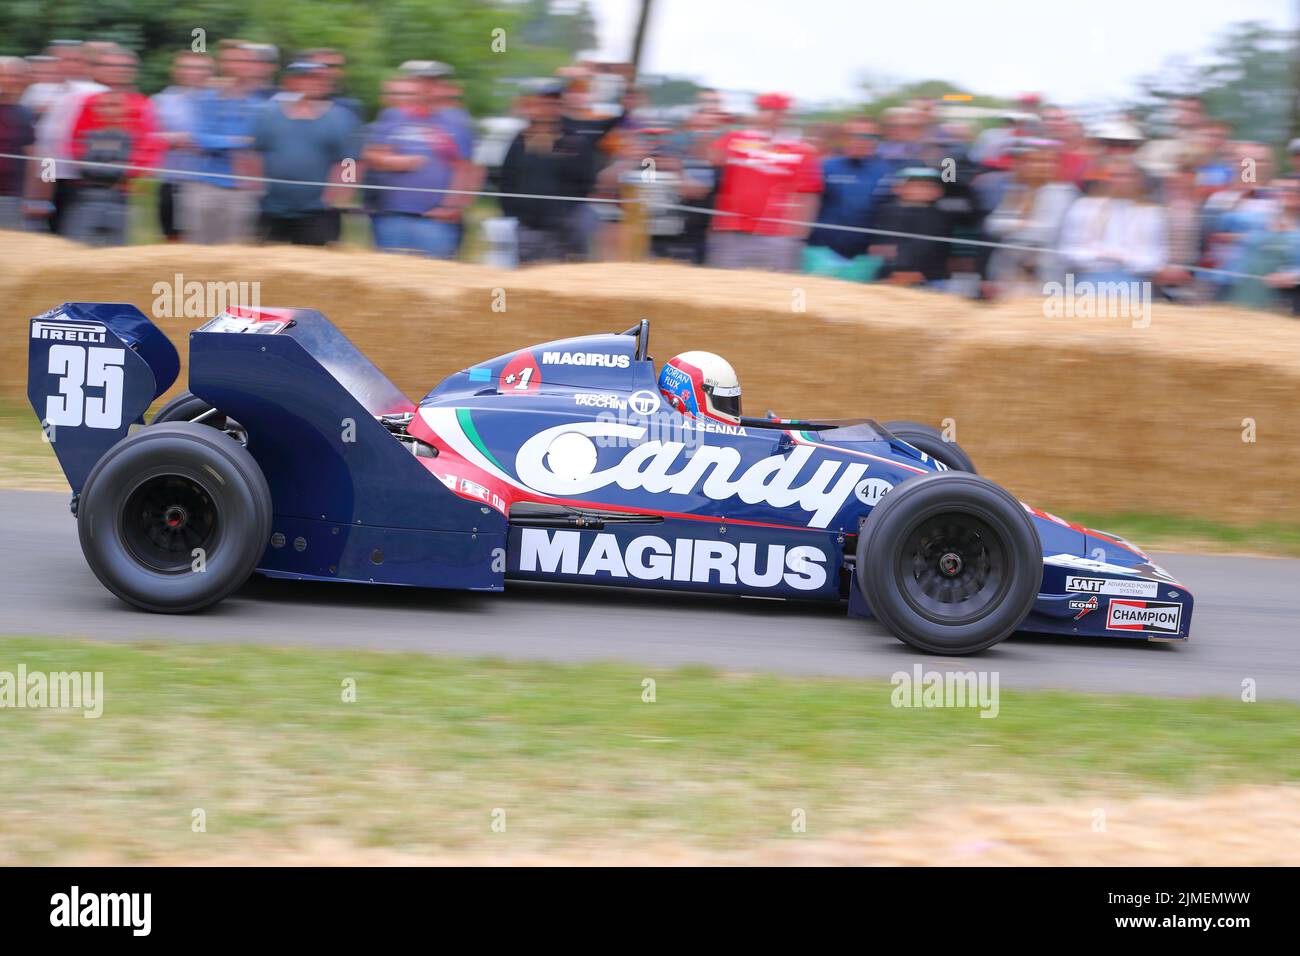 Ayrton Senna's Toleman Hart TG183 F1 car at the Festival of Speed at Goodwood 2022, Sussex, UK Stock Photo